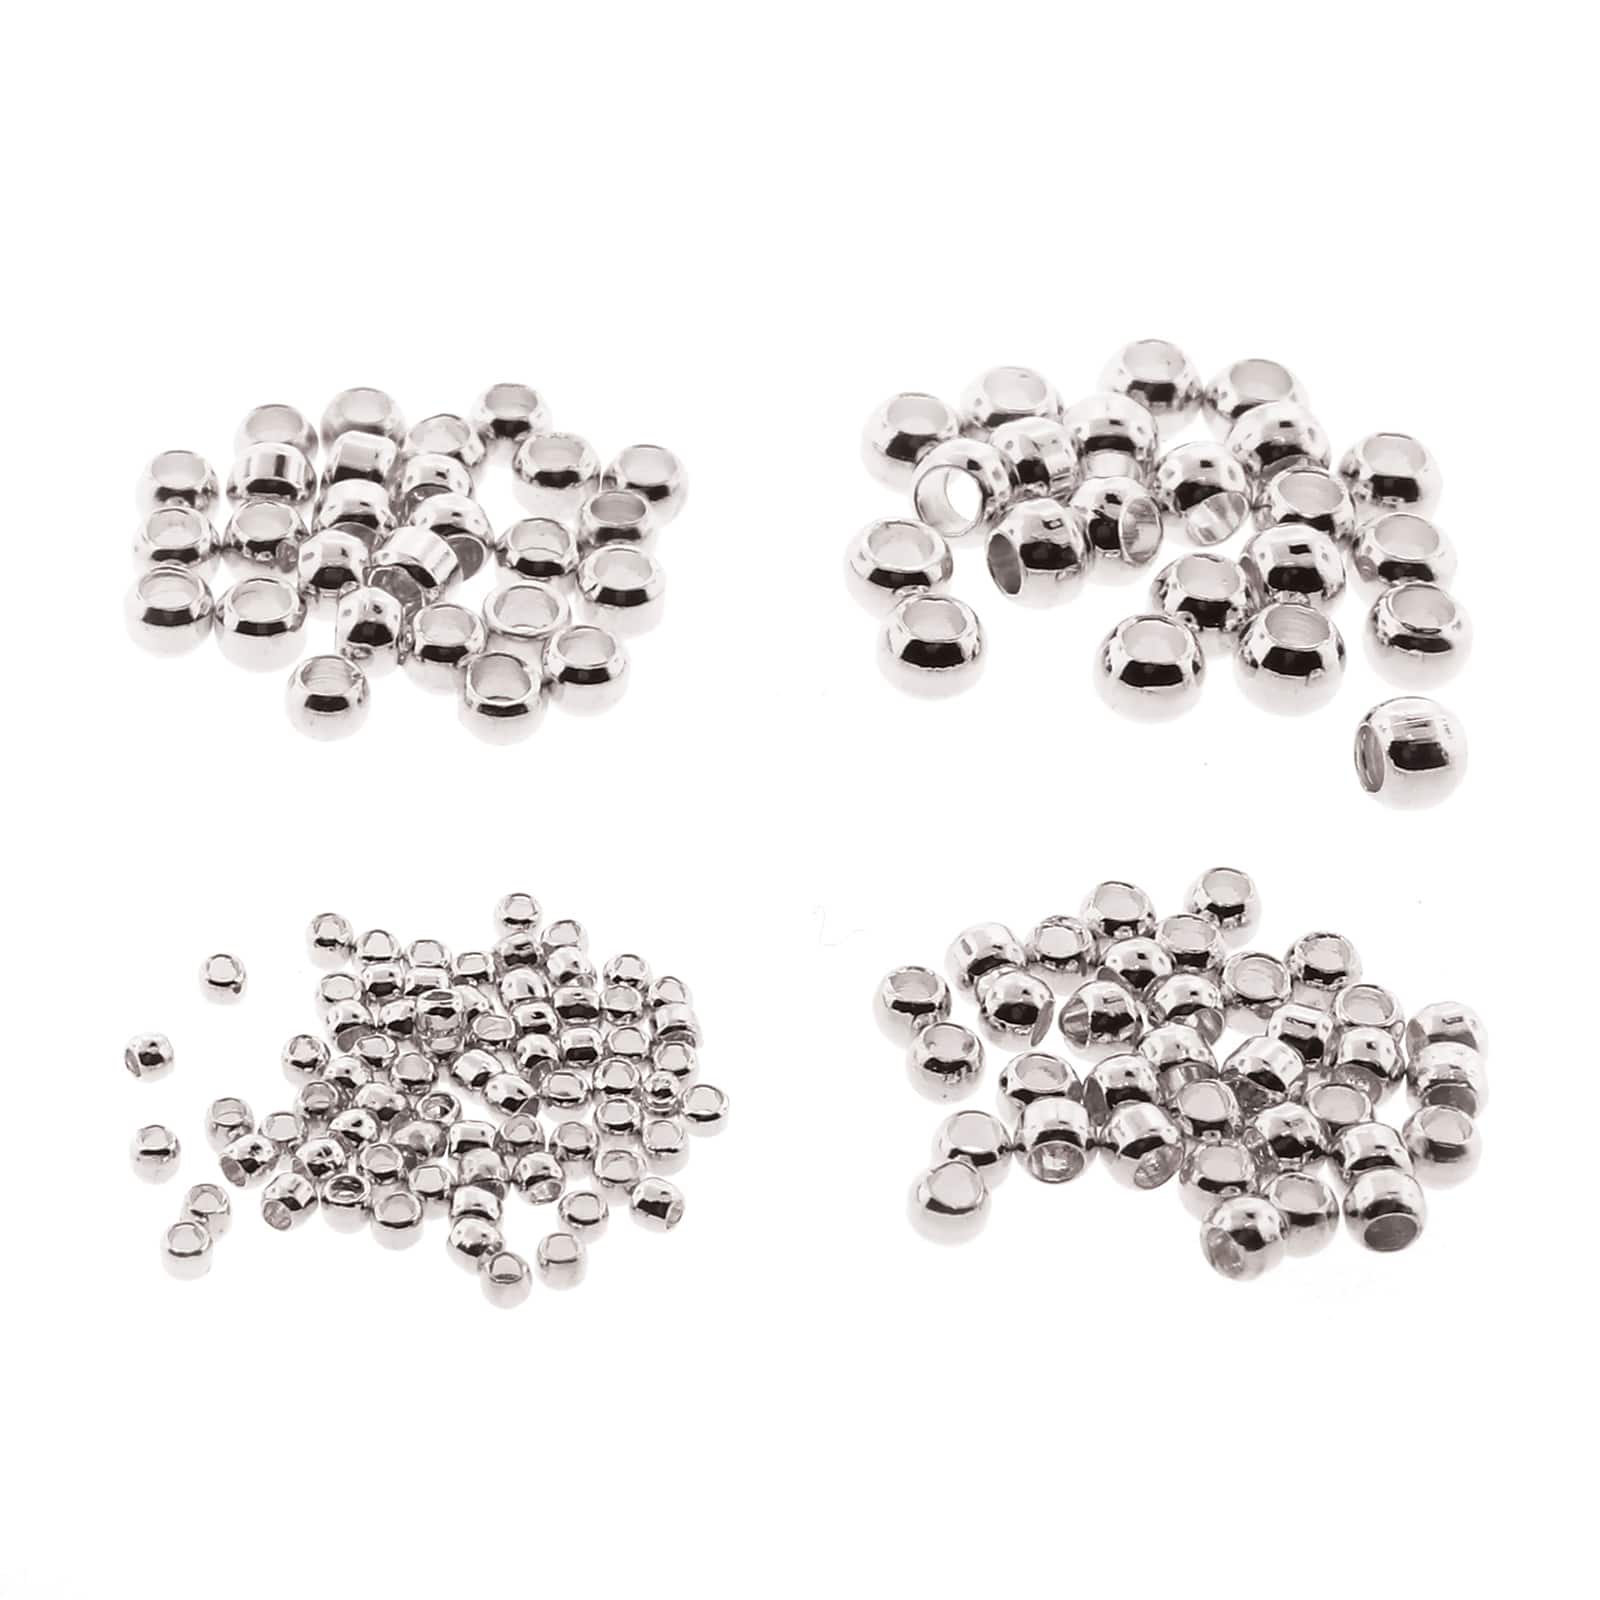 2mm Bright Silver Round Crimp Beads / 100 Pack / 2 x 1mm with 1.2